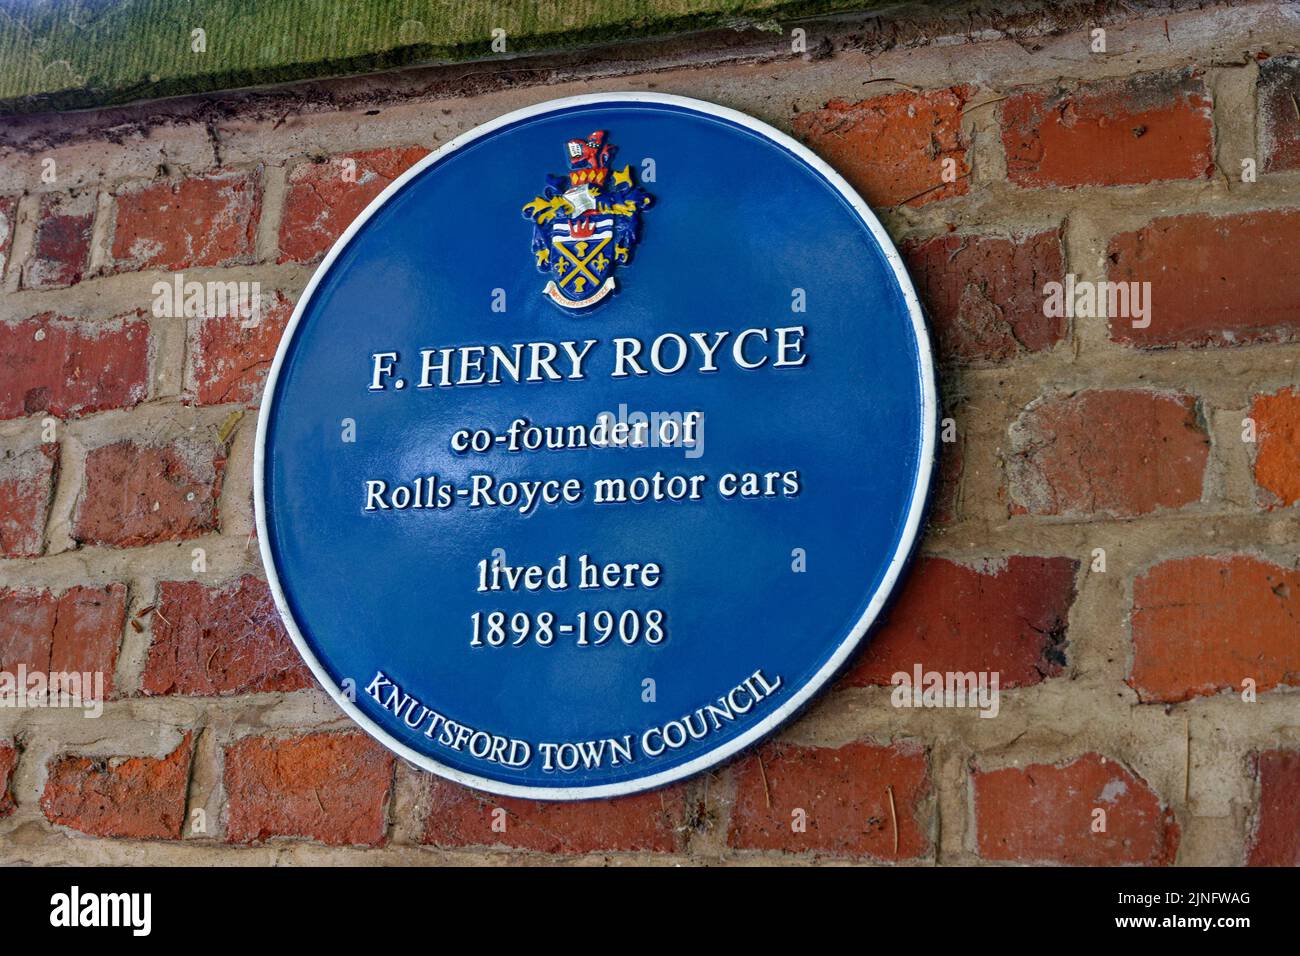 Commemorative Blue Plate outside the former home of F Henry Royce co-founder of Rolls Royce motor cars at Knutsford, Cheshire, England. Stock Photo